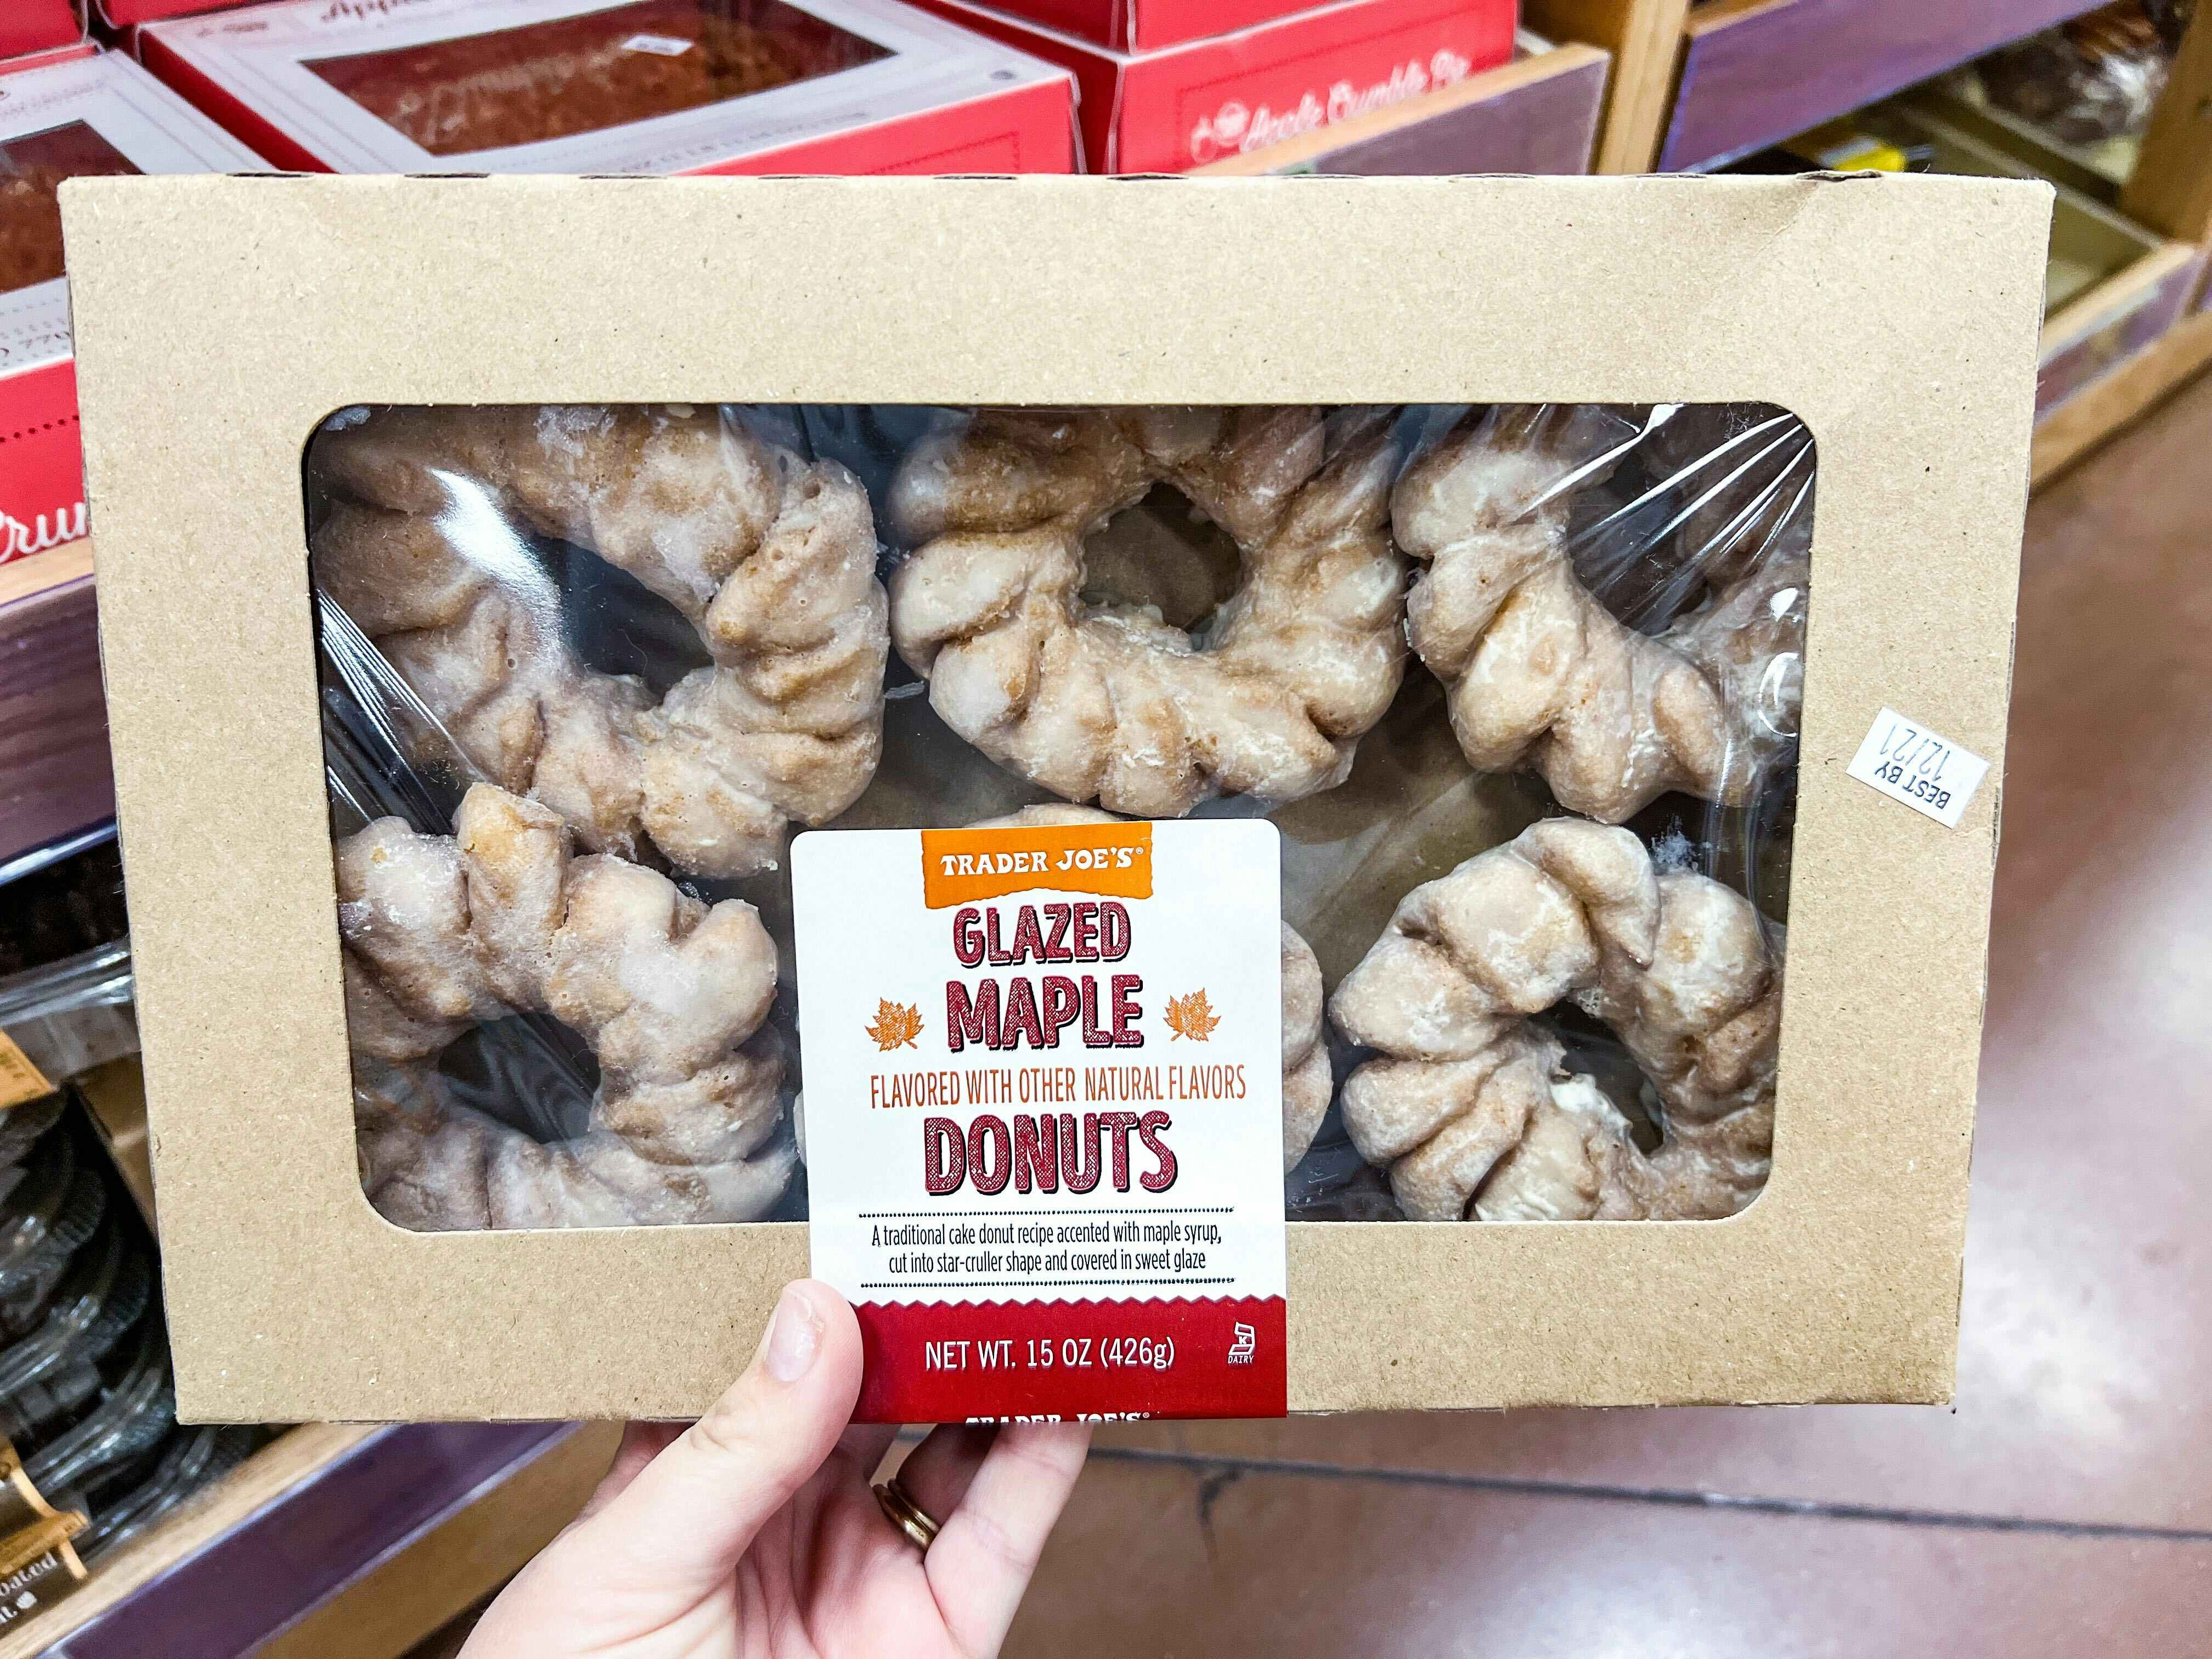 hand holding a box of Trader Joe's Glazed Maple Donuts in store